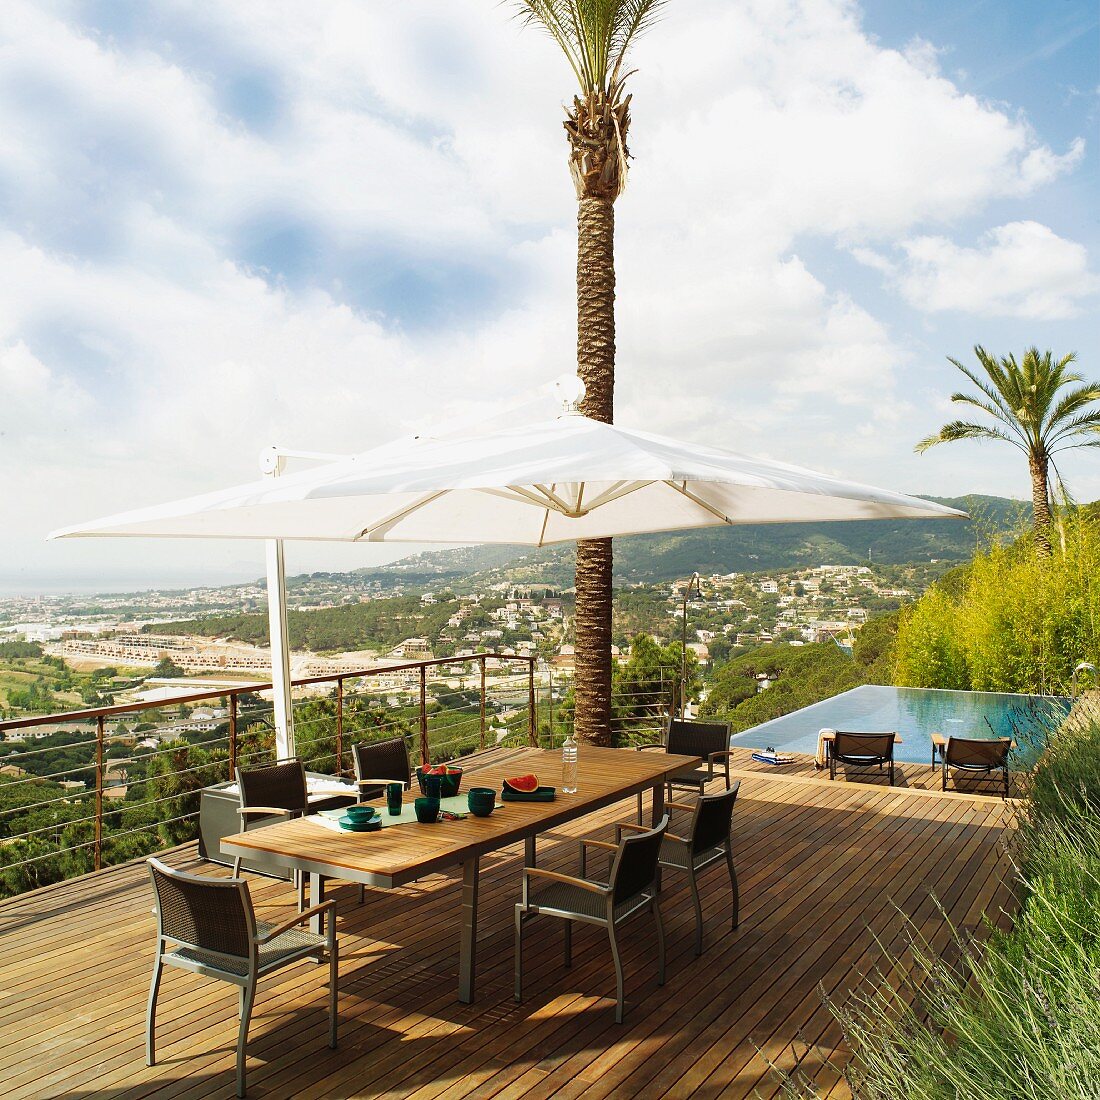 Dining set and parasol on wooden deck with view of town on hillside; infinity pool in background